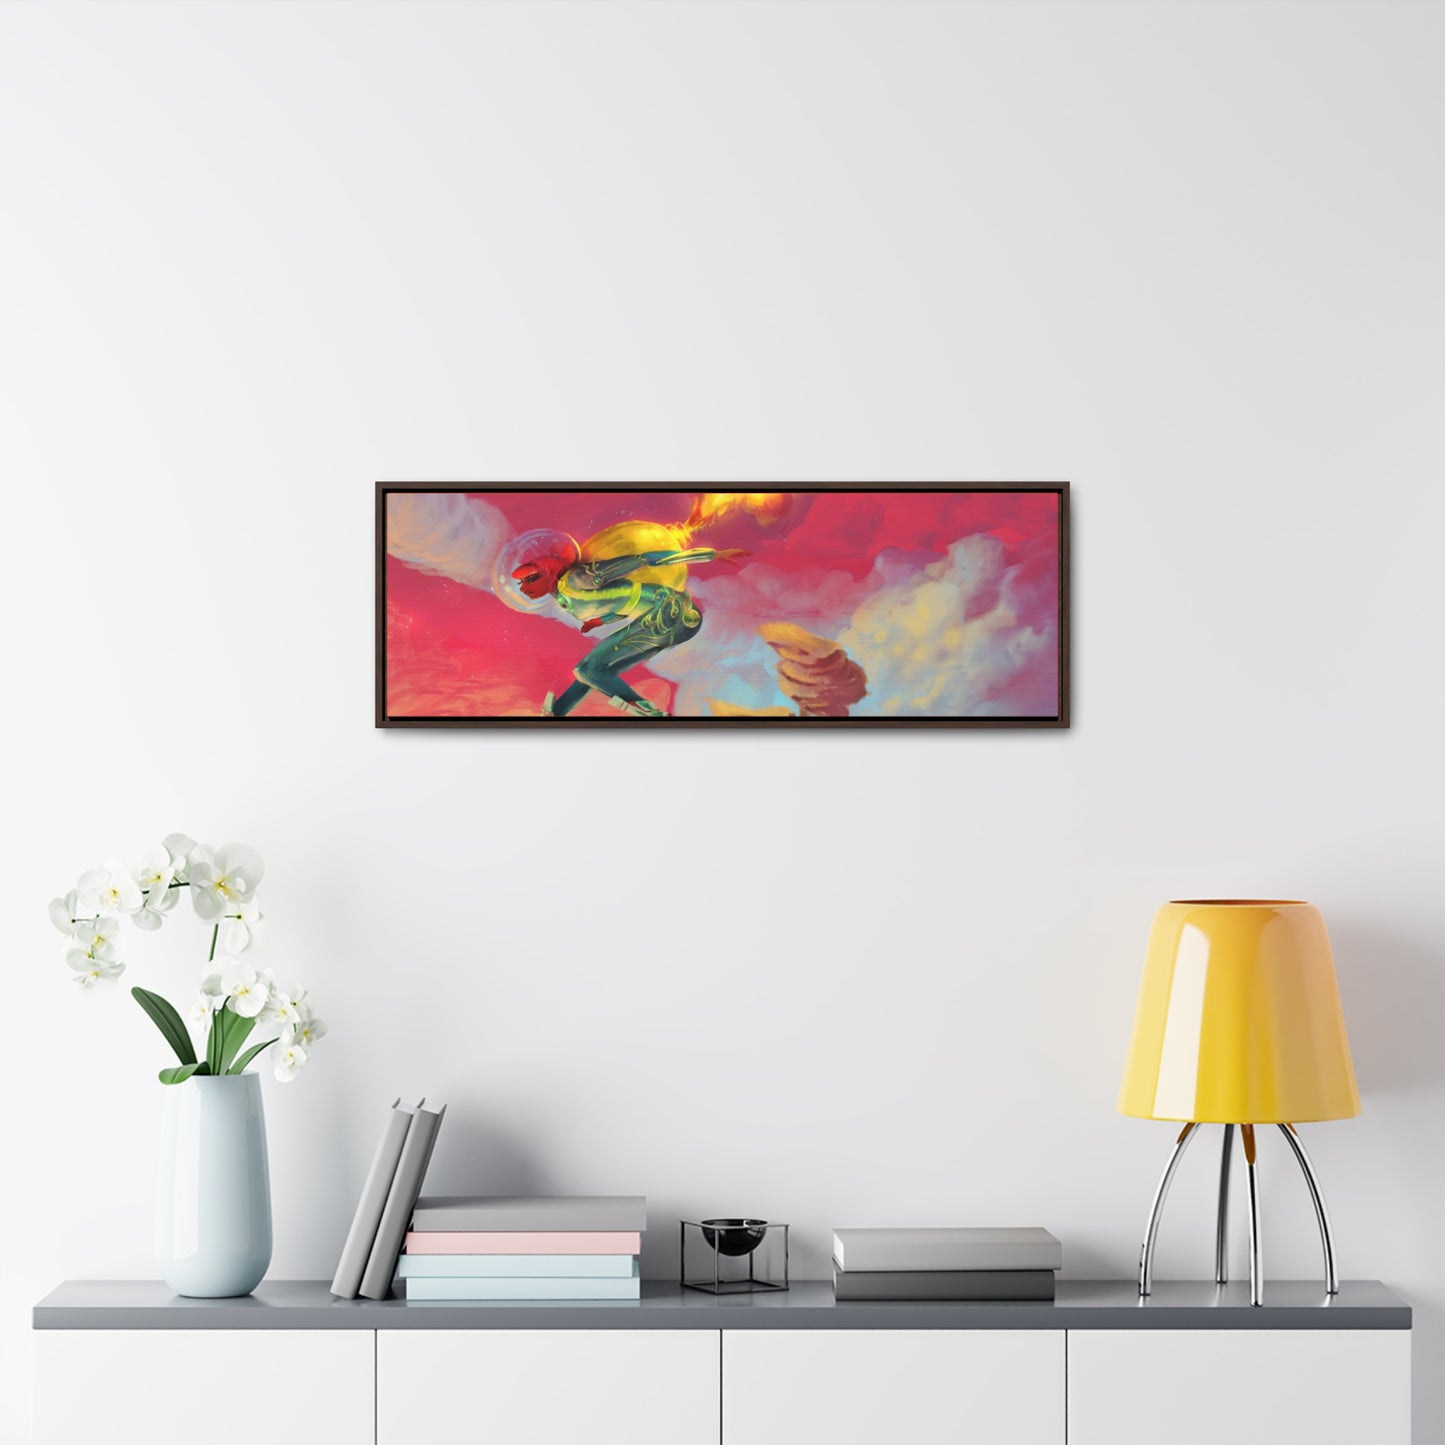 Doin Me a Space - Gallery Canvas Wraps, Horizontal Frame